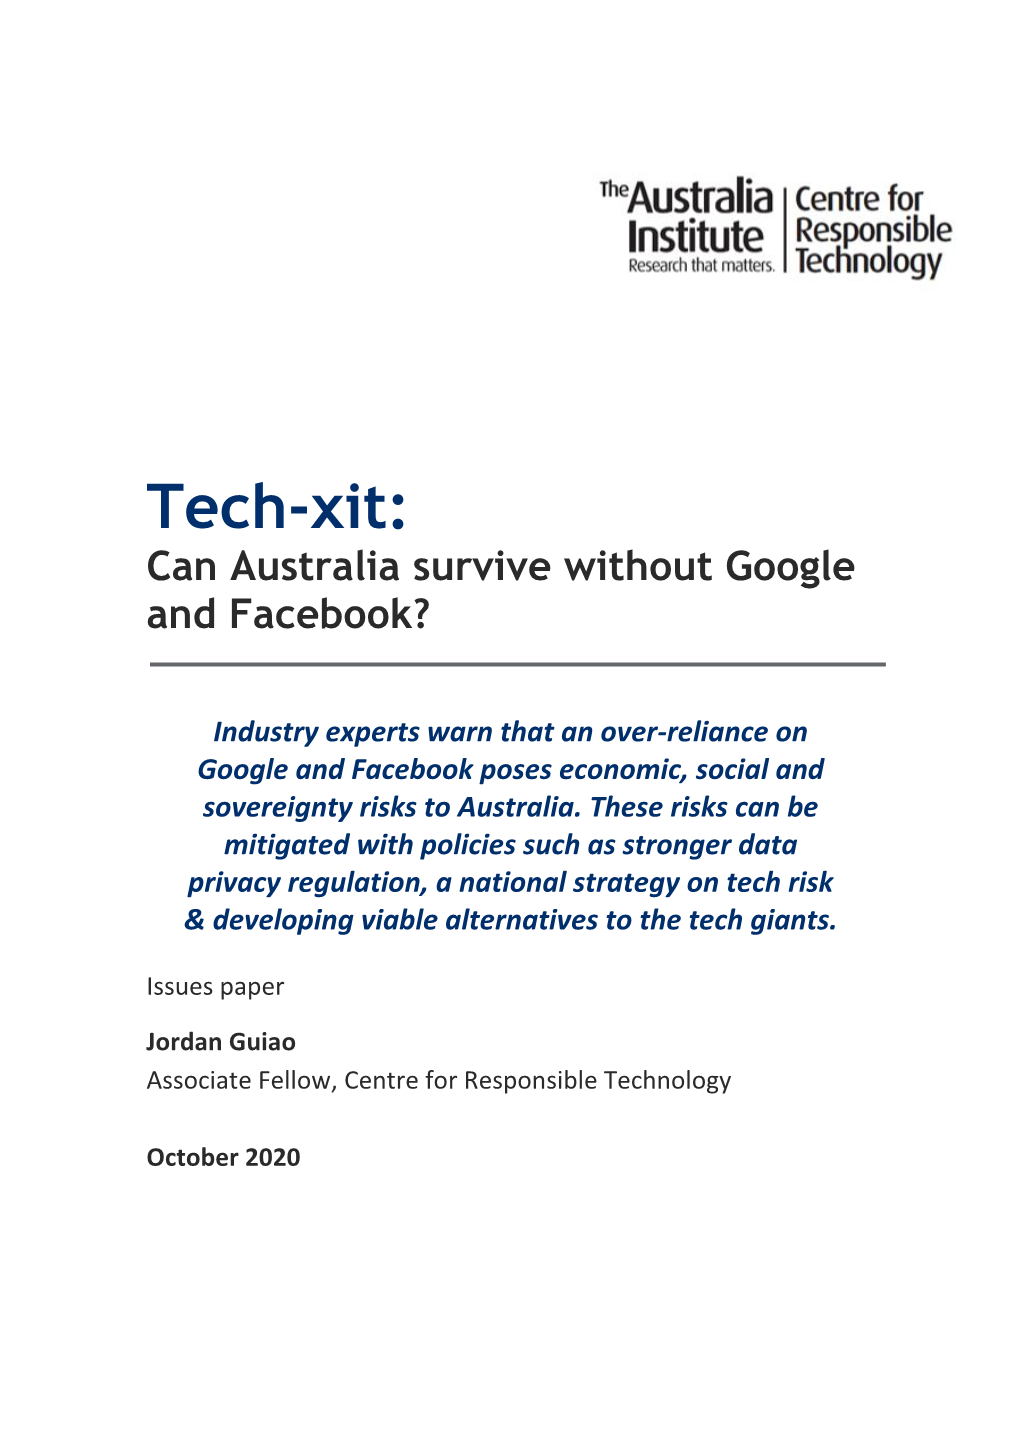 Tech-Xit: Can Australia Survive Without Google and Facebook?